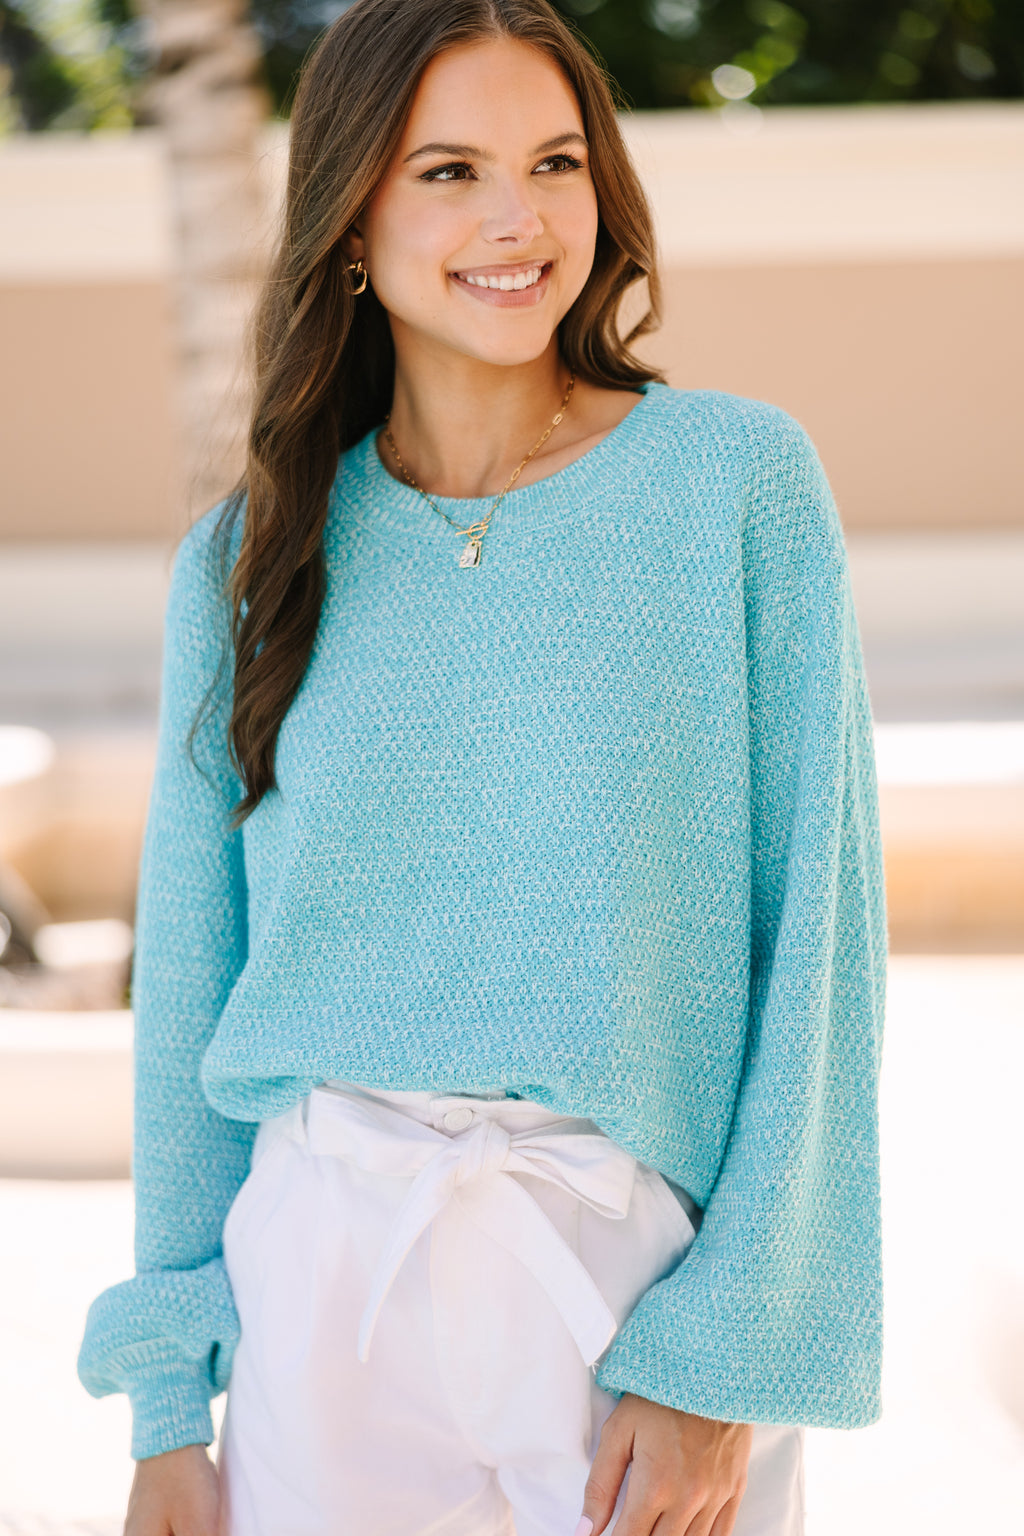 The Slouchy Turquoise Blue Bubble Sleeve Sweater – Shop the Mint